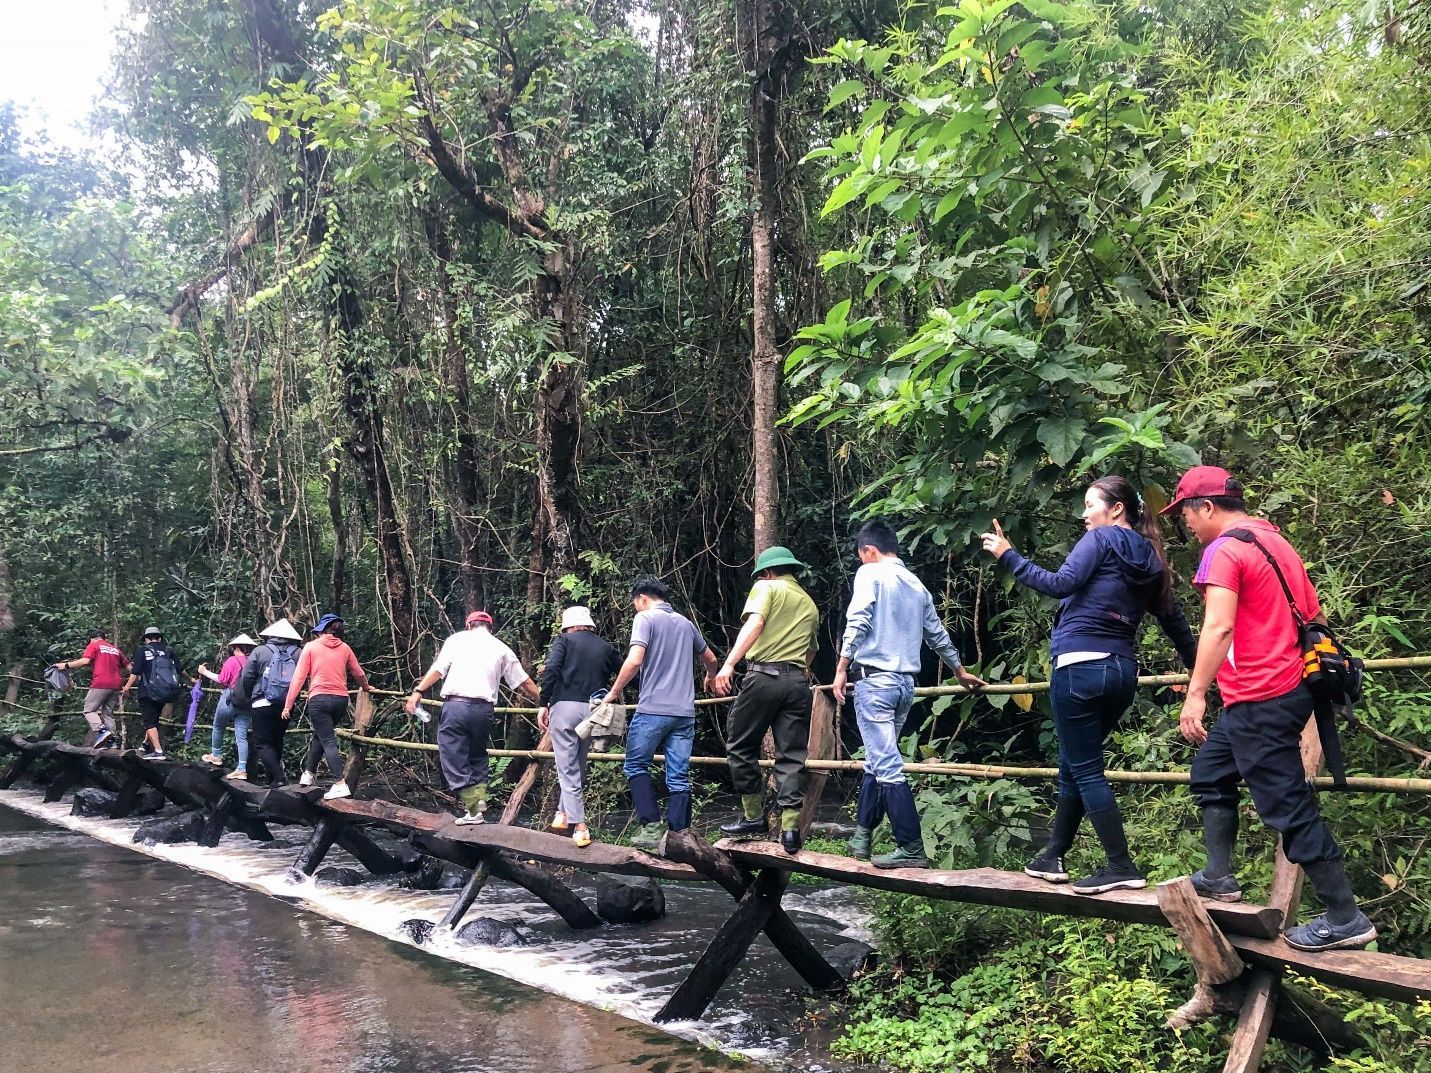 A group of people standing on a bridge over a river Description automatically generated with low confidence